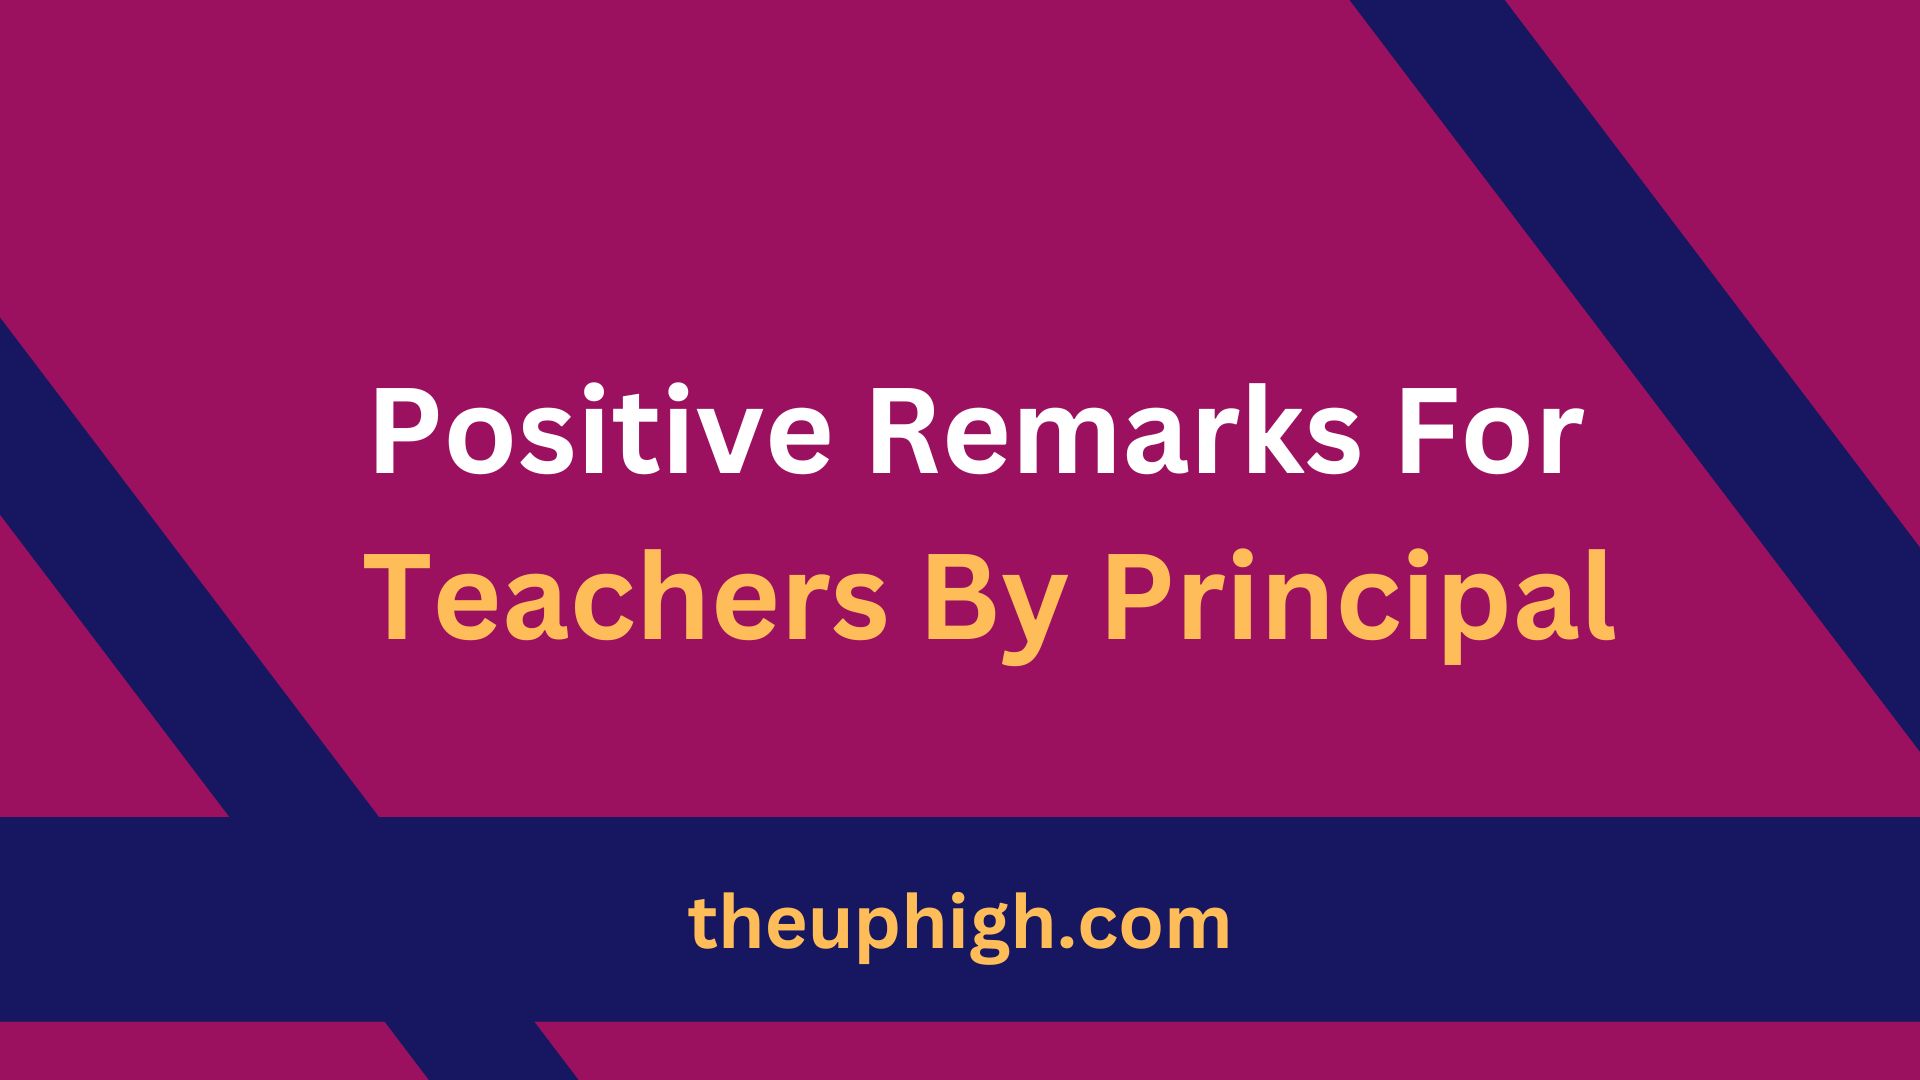 Positive Remarks For Teachers By Principal